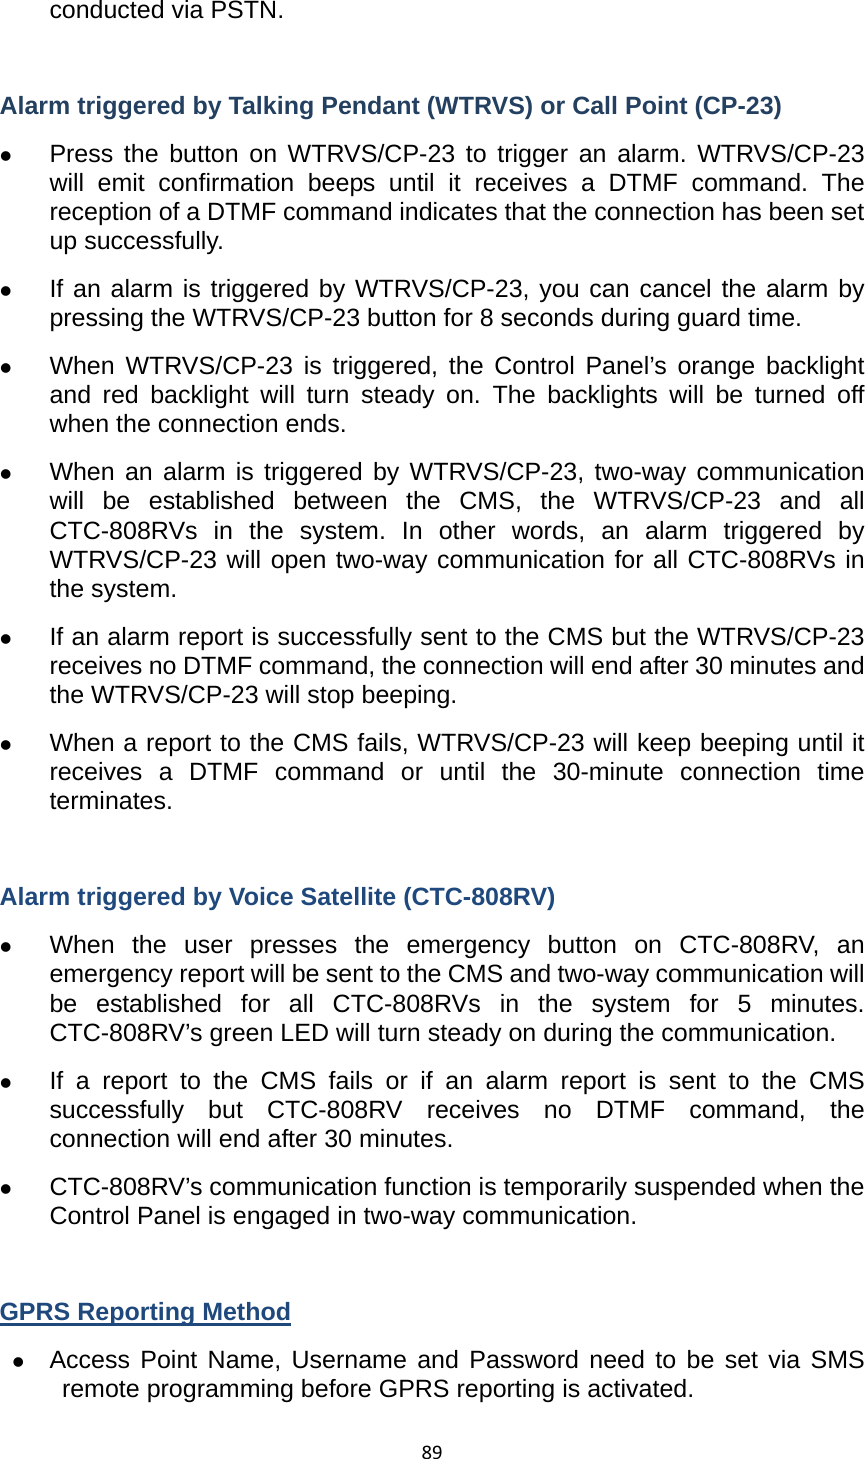 89conducted via PSTN.    Alarm triggered by Talking Pendant (WTRVS) or Call Point (CP-23) z Press the button on WTRVS/CP-23 to trigger an alarm. WTRVS/CP-23 will emit confirmation beeps until it receives a DTMF command. The reception of a DTMF command indicates that the connection has been set up successfully.   z If an alarm is triggered by WTRVS/CP-23, you can cancel the alarm by pressing the WTRVS/CP-23 button for 8 seconds during guard time.   z When WTRVS/CP-23 is triggered, the Control Panel’s orange backlight and red backlight will turn steady on. The backlights will be turned off when the connection ends.   z When an alarm is triggered by WTRVS/CP-23, two-way communication will be established between the CMS, the WTRVS/CP-23 and all CTC-808RVs in the system. In other words, an alarm triggered by WTRVS/CP-23 will open two-way communication for all CTC-808RVs in the system.   z If an alarm report is successfully sent to the CMS but the WTRVS/CP-23 receives no DTMF command, the connection will end after 30 minutes and the WTRVS/CP-23 will stop beeping.   z When a report to the CMS fails, WTRVS/CP-23 will keep beeping until it receives a DTMF command or until the 30-minute connection time terminates.  Alarm triggered by Voice Satellite (CTC-808RV) z When the user presses the emergency button on CTC-808RV, an emergency report will be sent to the CMS and two-way communication will be established for all CTC-808RVs in the system for 5 minutes. CTC-808RV’s green LED will turn steady on during the communication.   z If a report to the CMS fails or if an alarm report is sent to the CMS successfully but CTC-808RV receives no DTMF command, the connection will end after 30 minutes.   z CTC-808RV’s communication function is temporarily suspended when the Control Panel is engaged in two-way communication.    GPRS Reporting Method z Access Point Name, Username and Password need to be set via SMS remote programming before GPRS reporting is activated.   